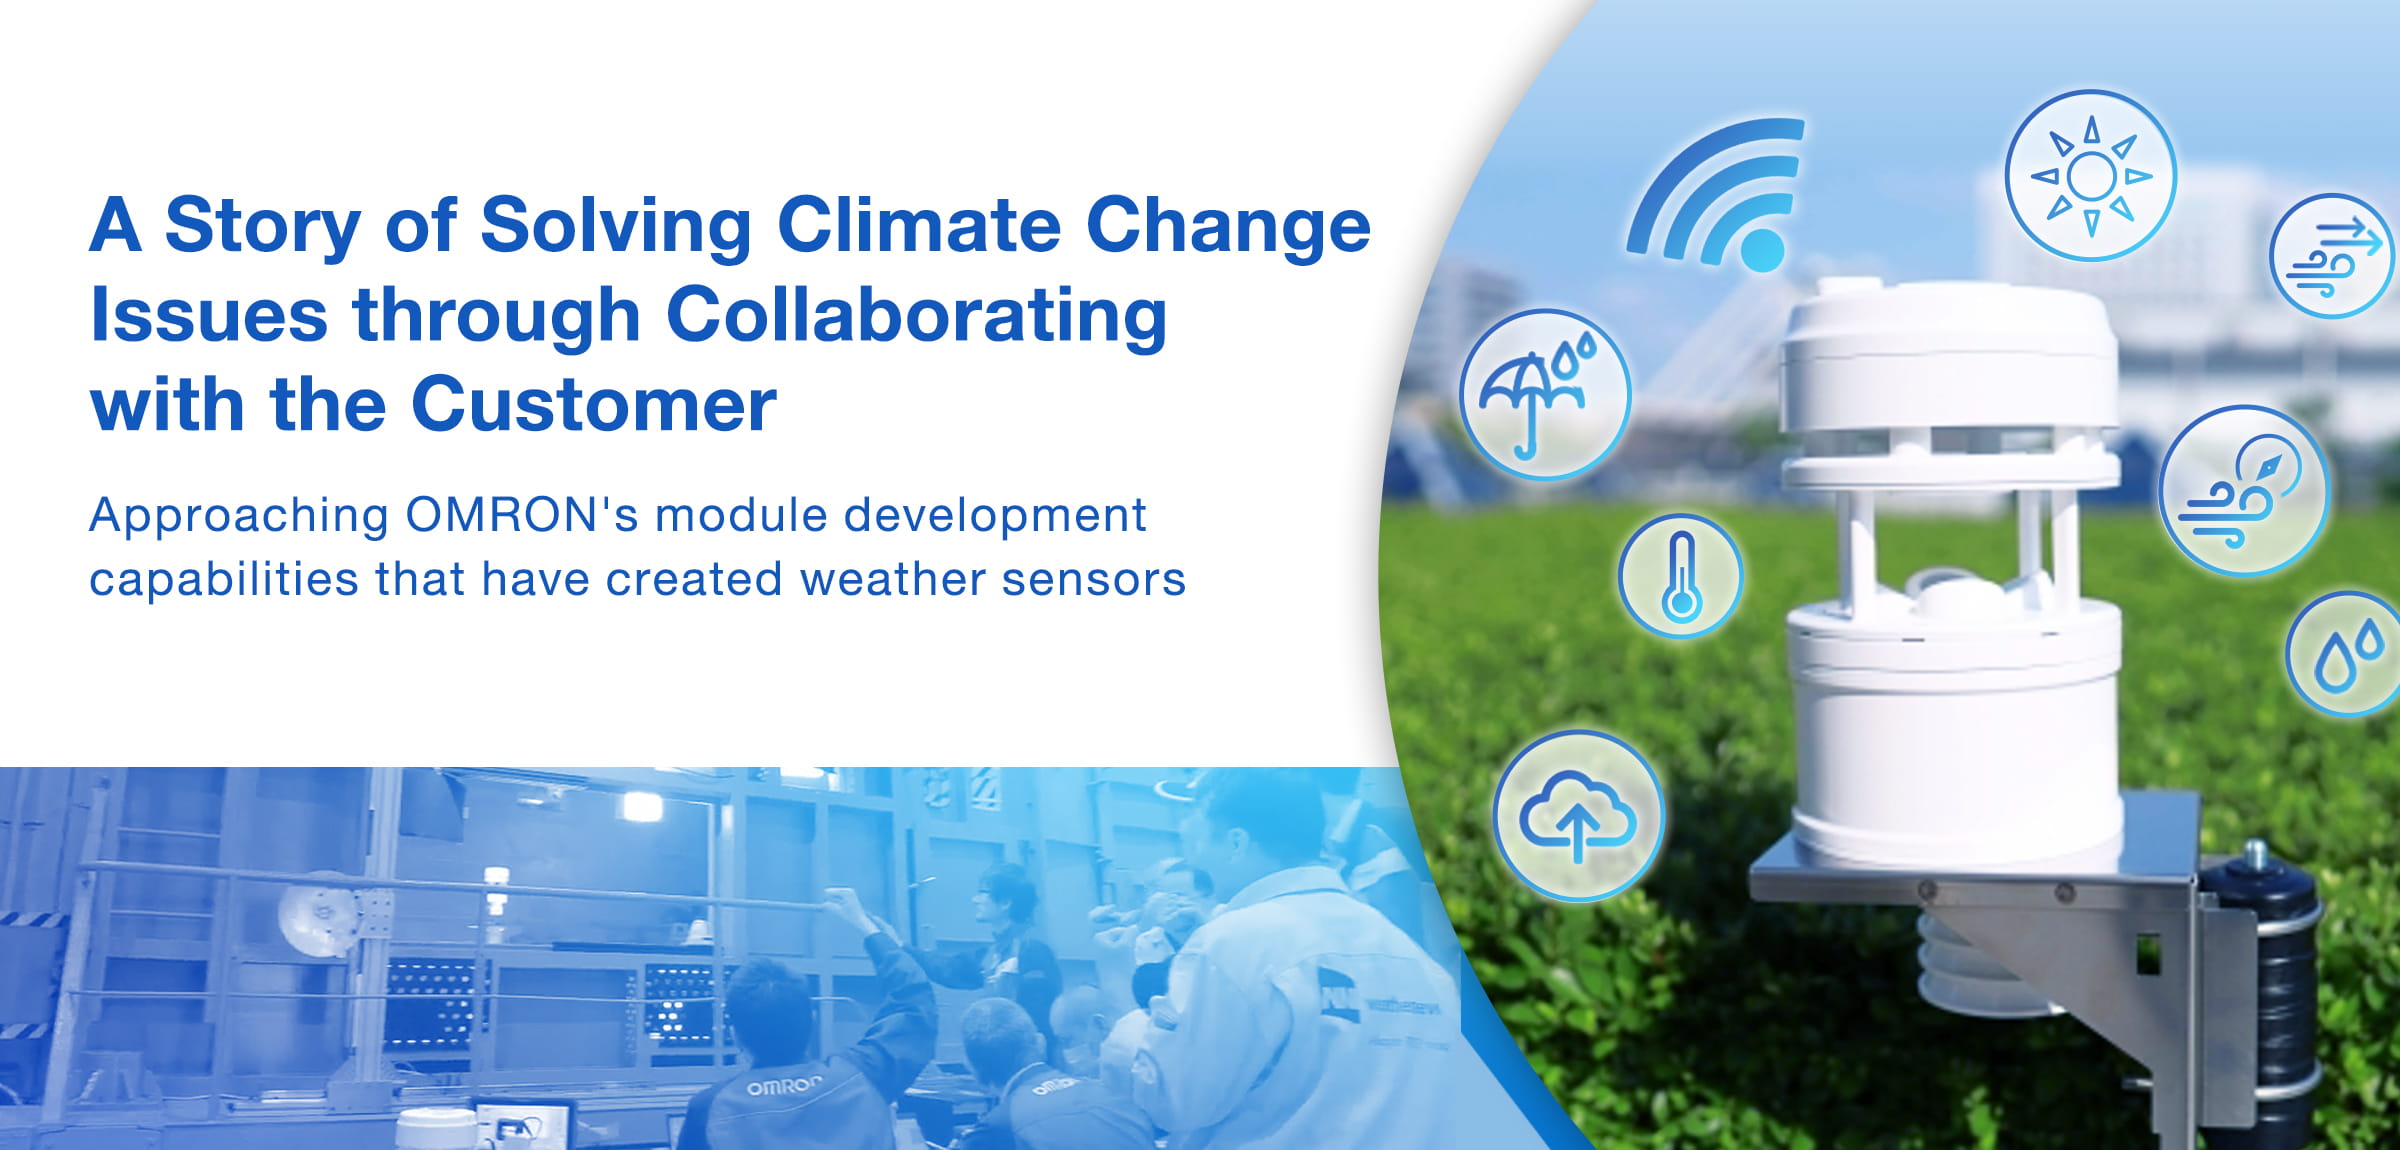 Solving Climate Change Issues through Co-Creation with the Customer. Approaching OMRON's module development capabilities that have created weather sensors.